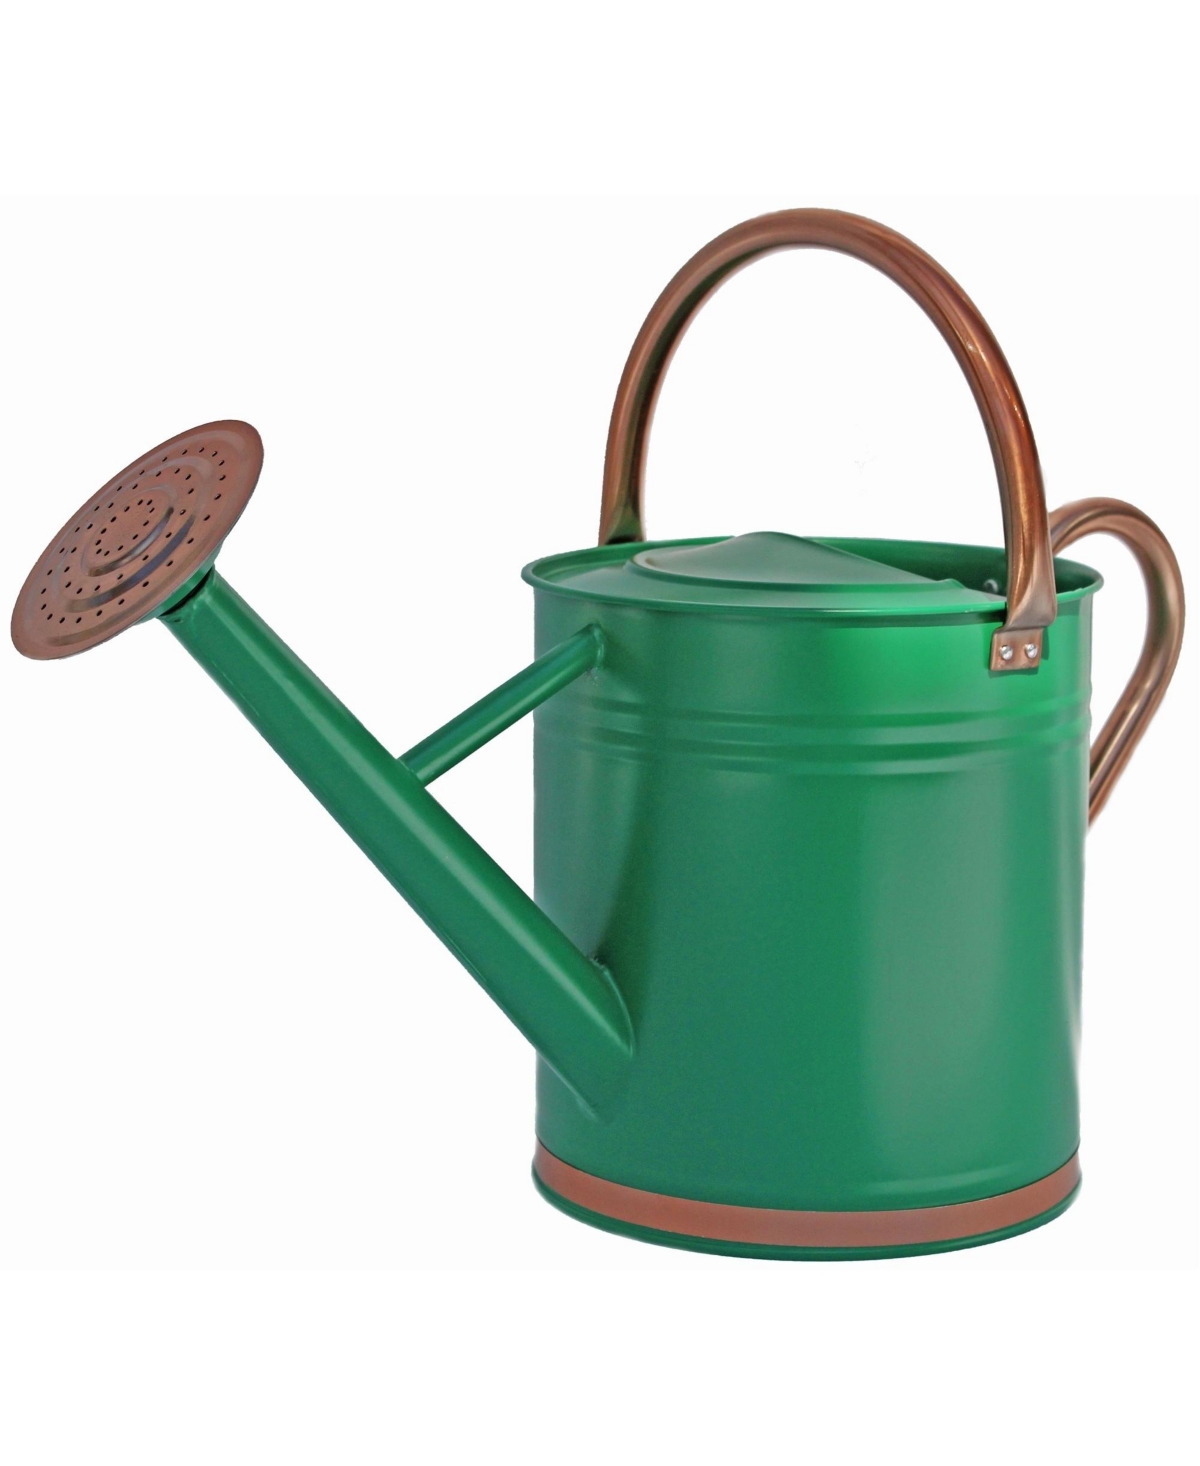 Gardener Select Metal Watering Can, Green Copper Accents, 1.85 Gal - Green